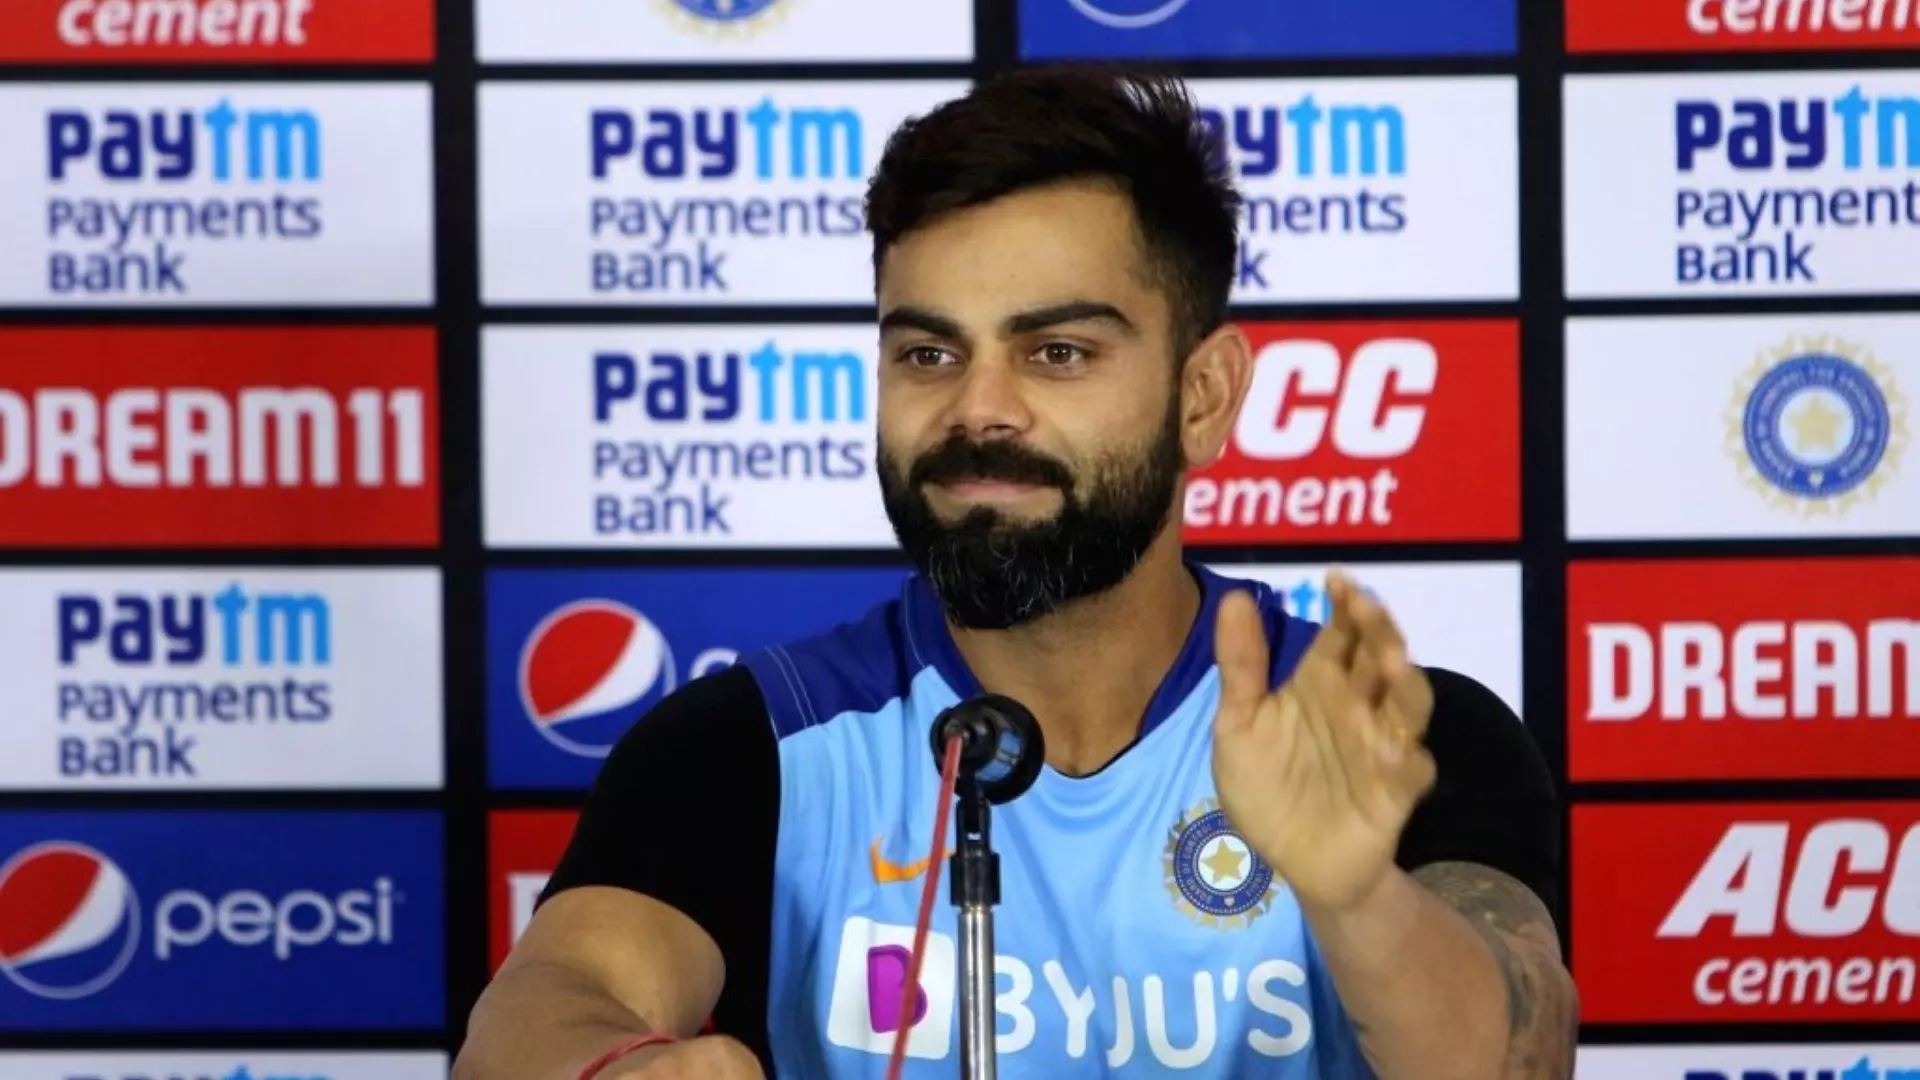 Team India Player Virat Kohli Says I do not Know Why BCCI Removed From Oneday Cricket Format Captaincy